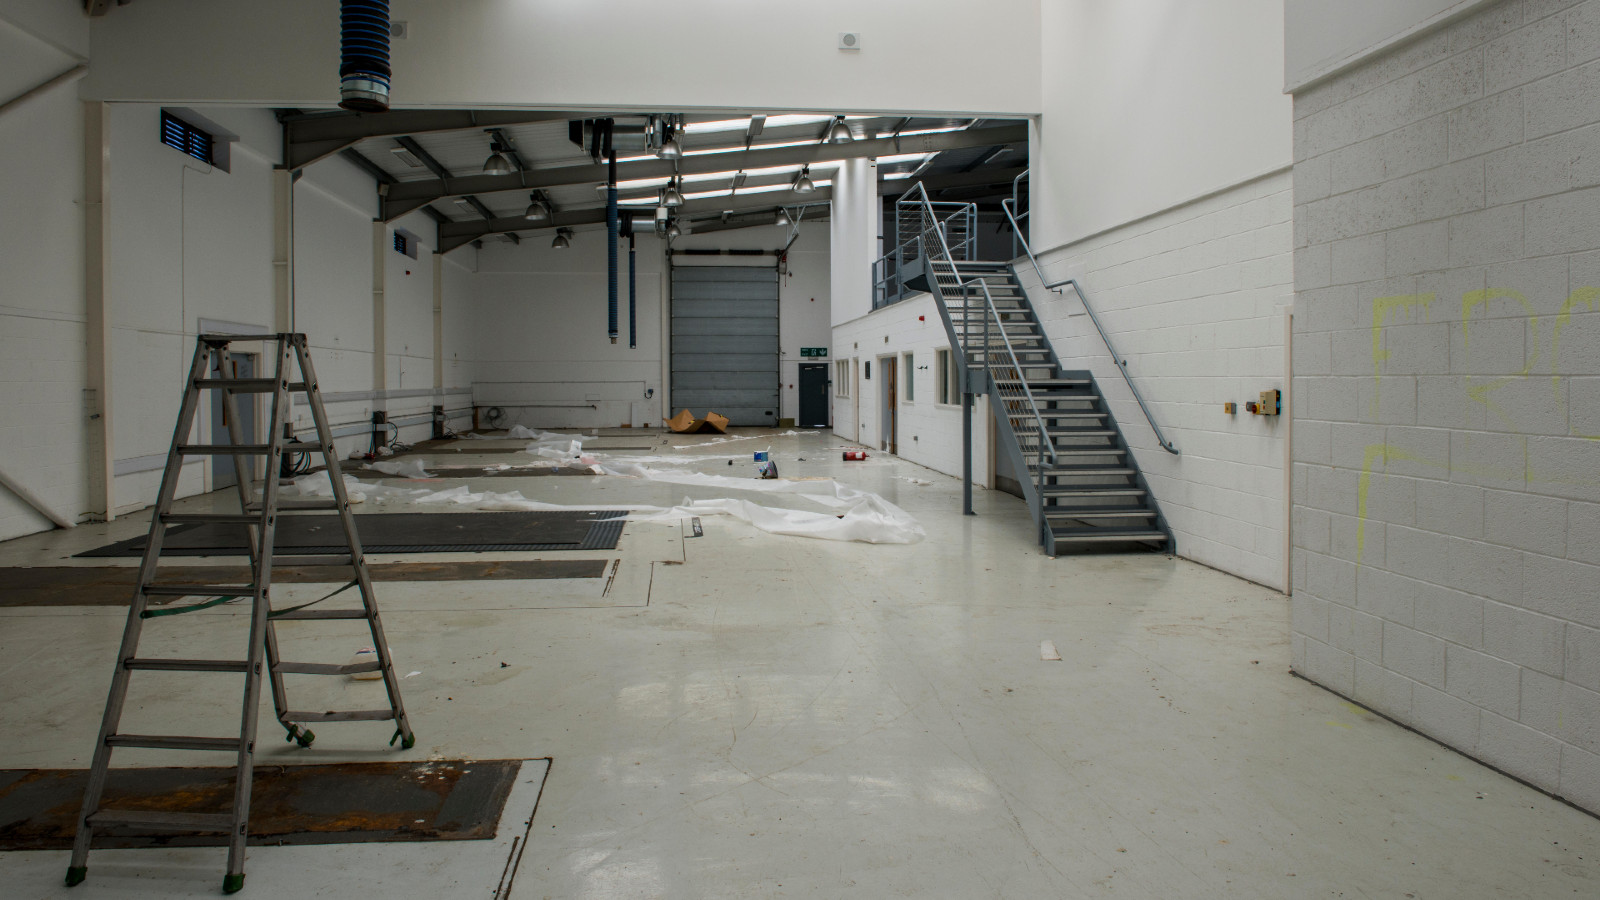 The abandoned race bays at the former headquarters of the Caterham F1 team. Picture from 2016.